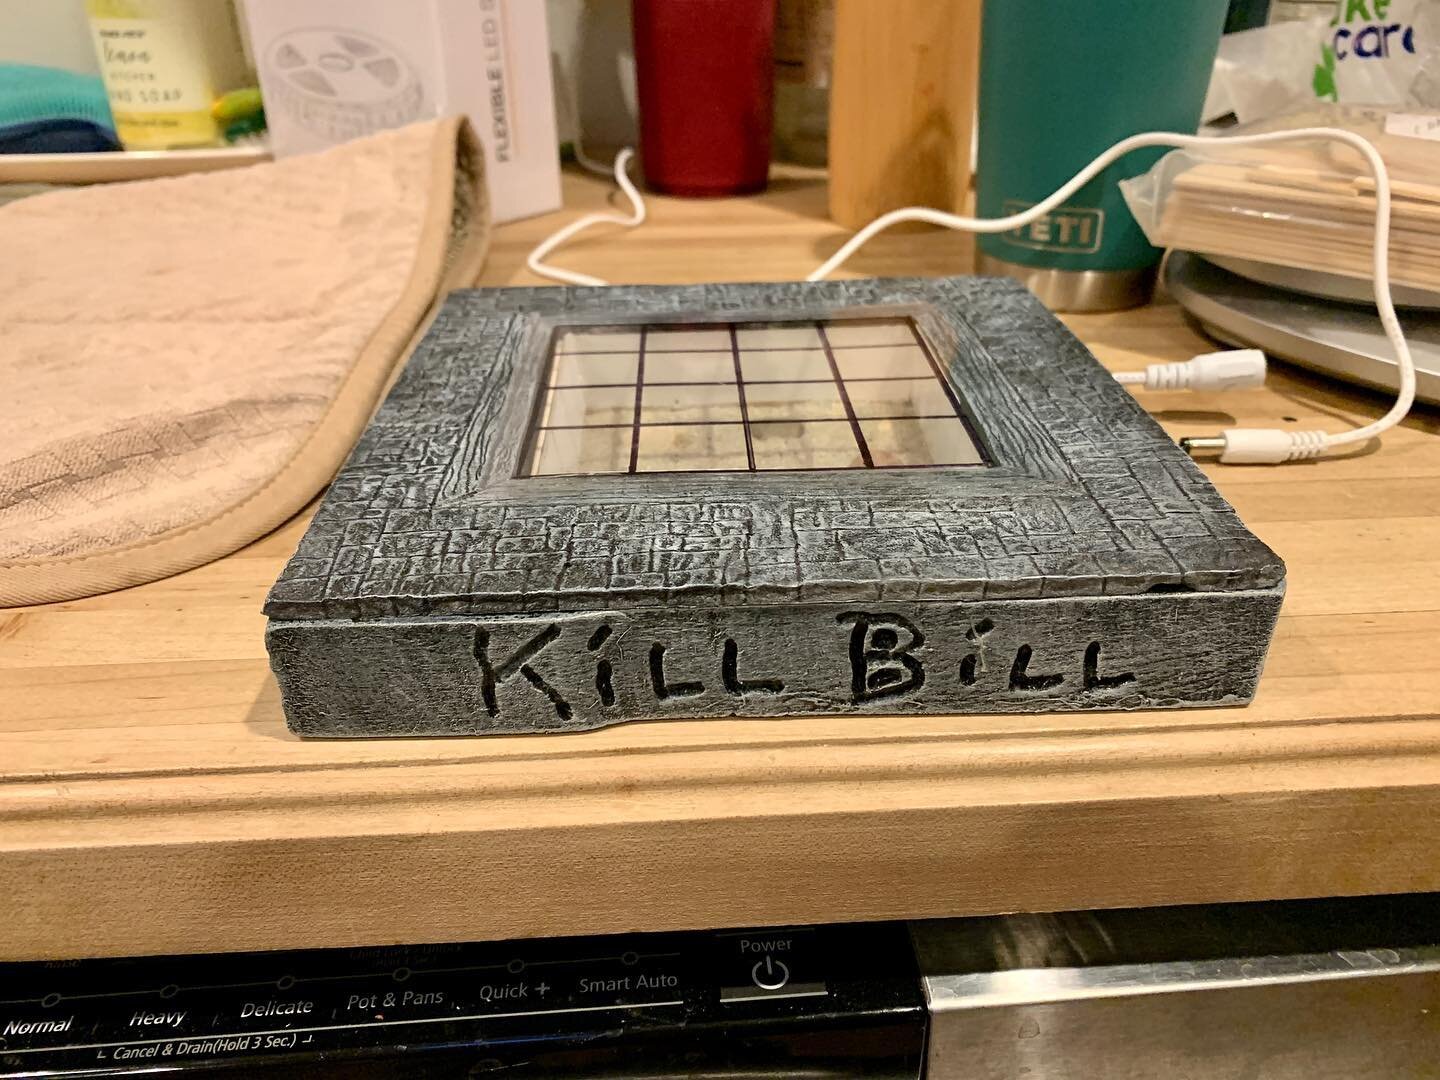 The base for the Kill Bill diorama is complete! It just needs about 44 minis added to it, that will happen on the stream tomorrow. 🤓#tabletopterrain #DND #tabletopgames #tabletopgaming #rpg #tabletoprpg #buildingminis #diorama #dioramacreators #craf